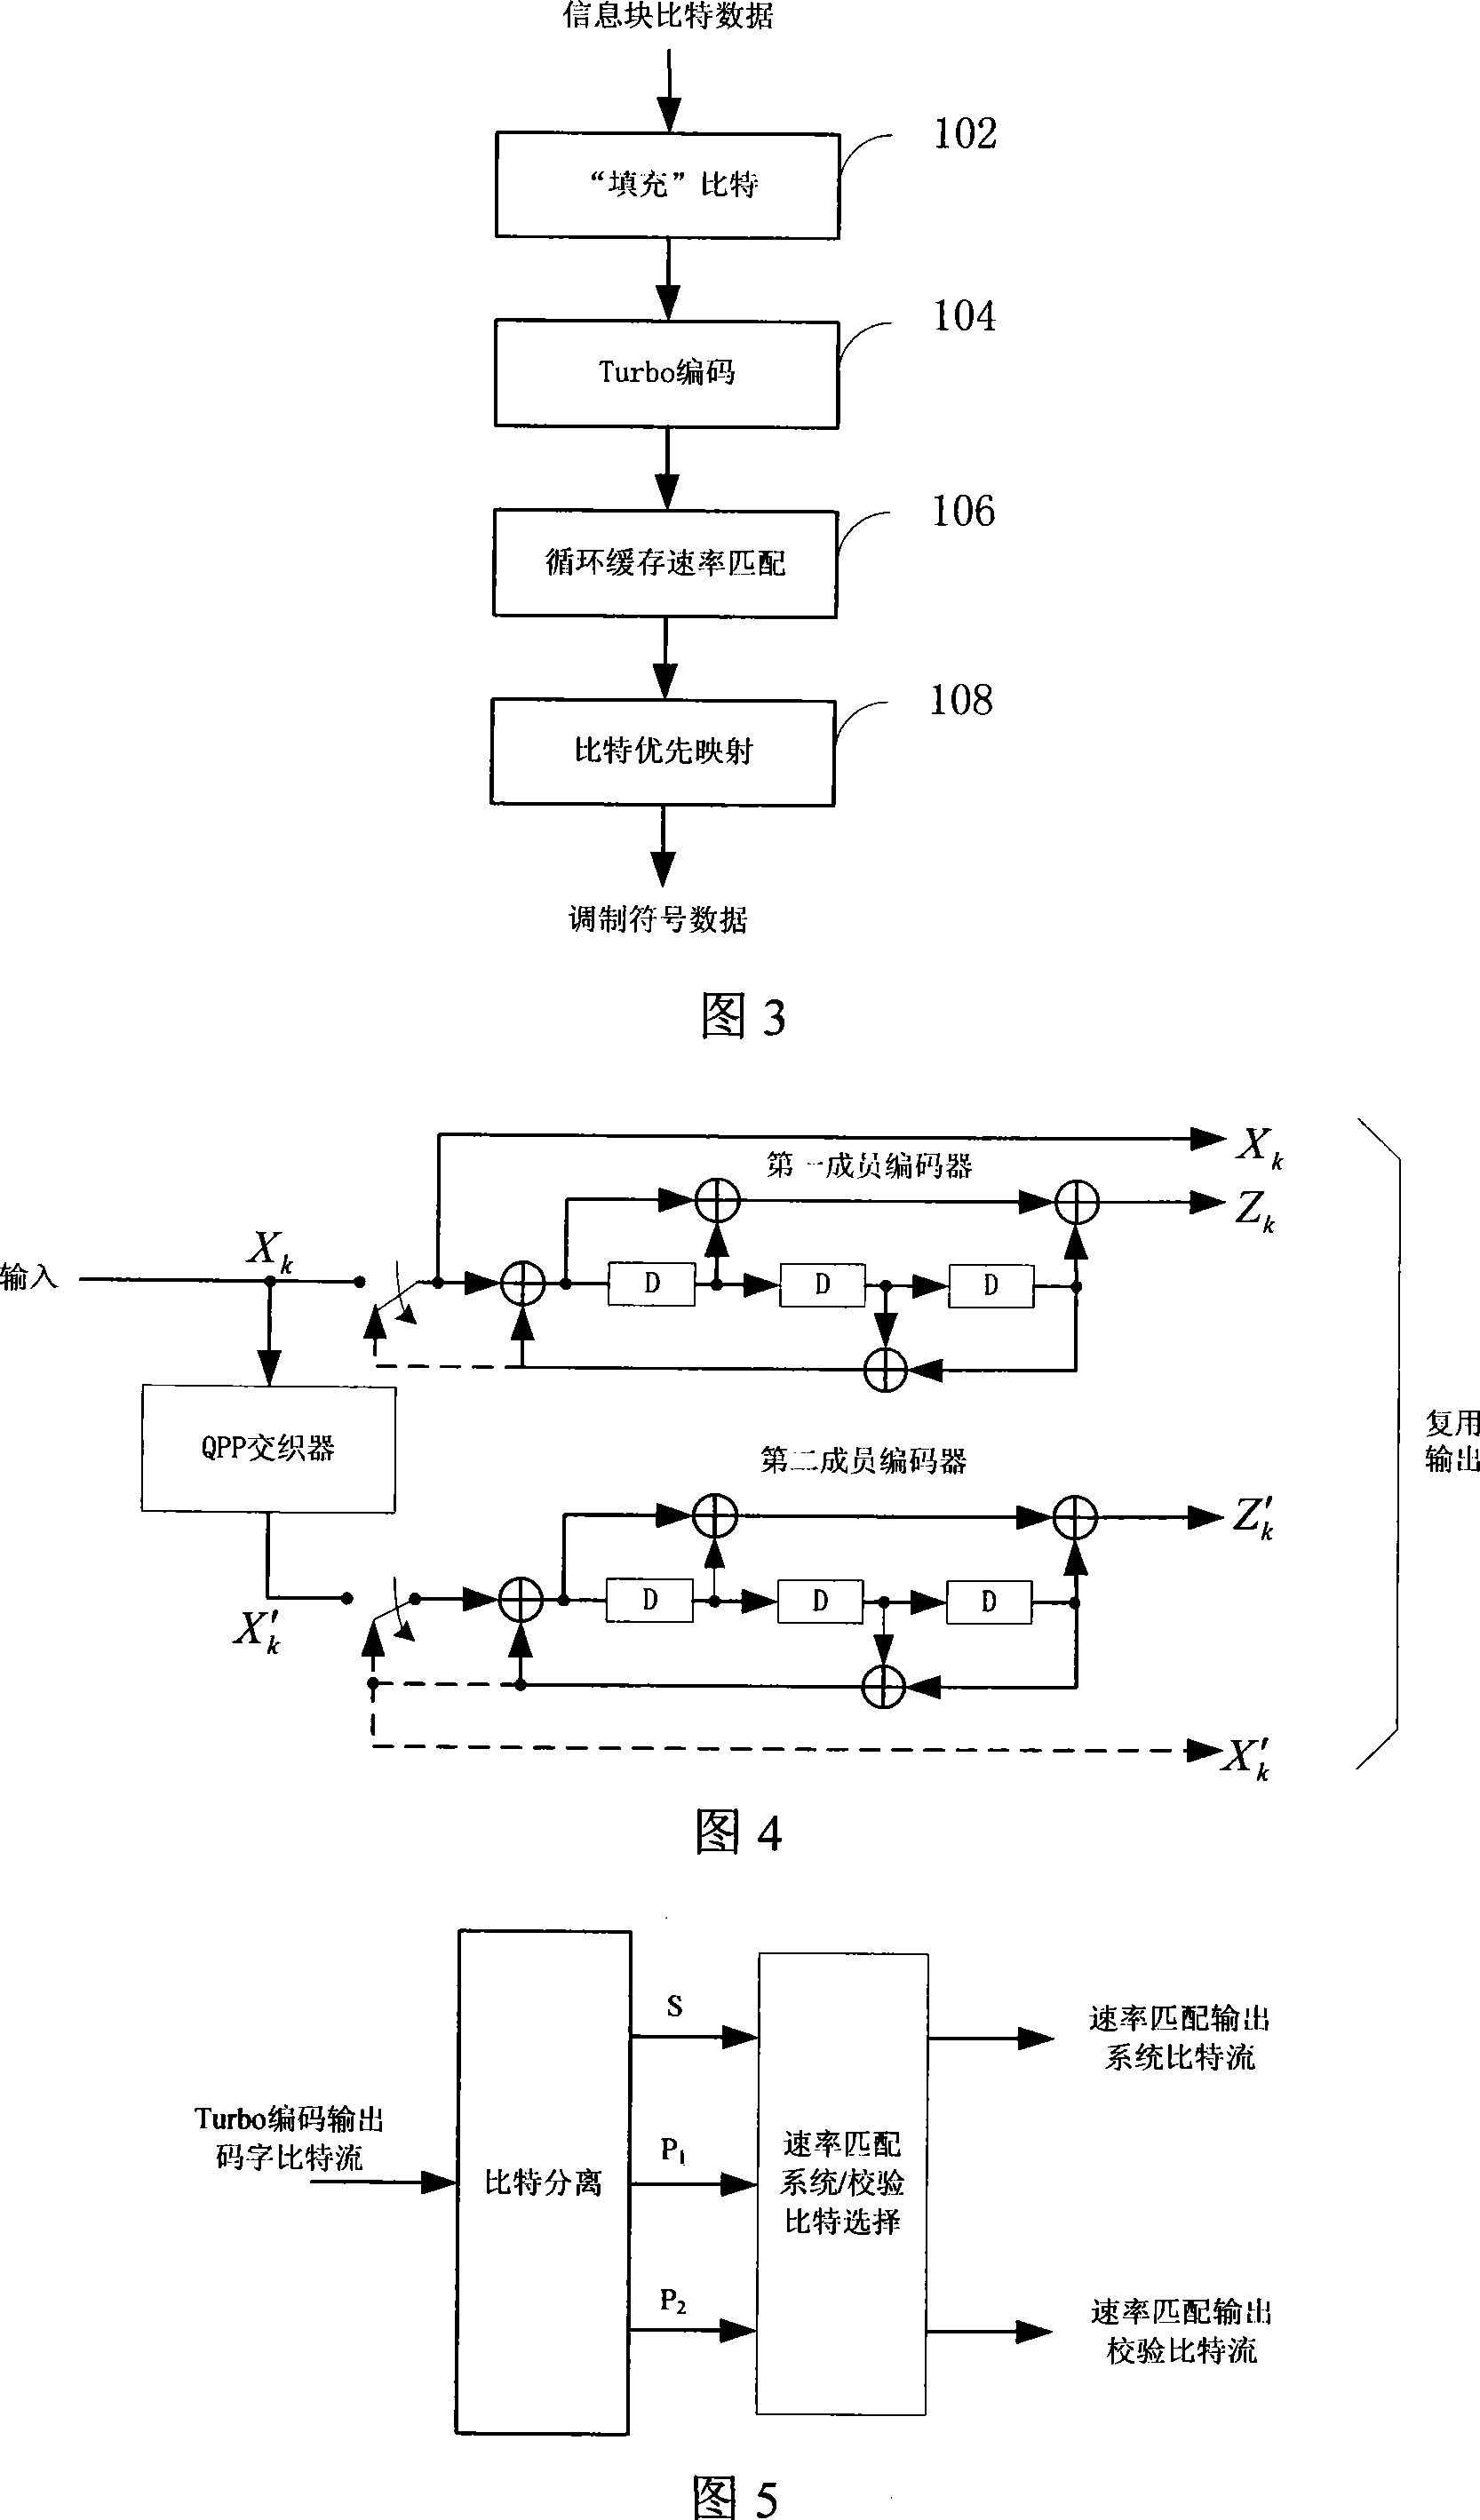 Radio physical layer channel code chain processing method